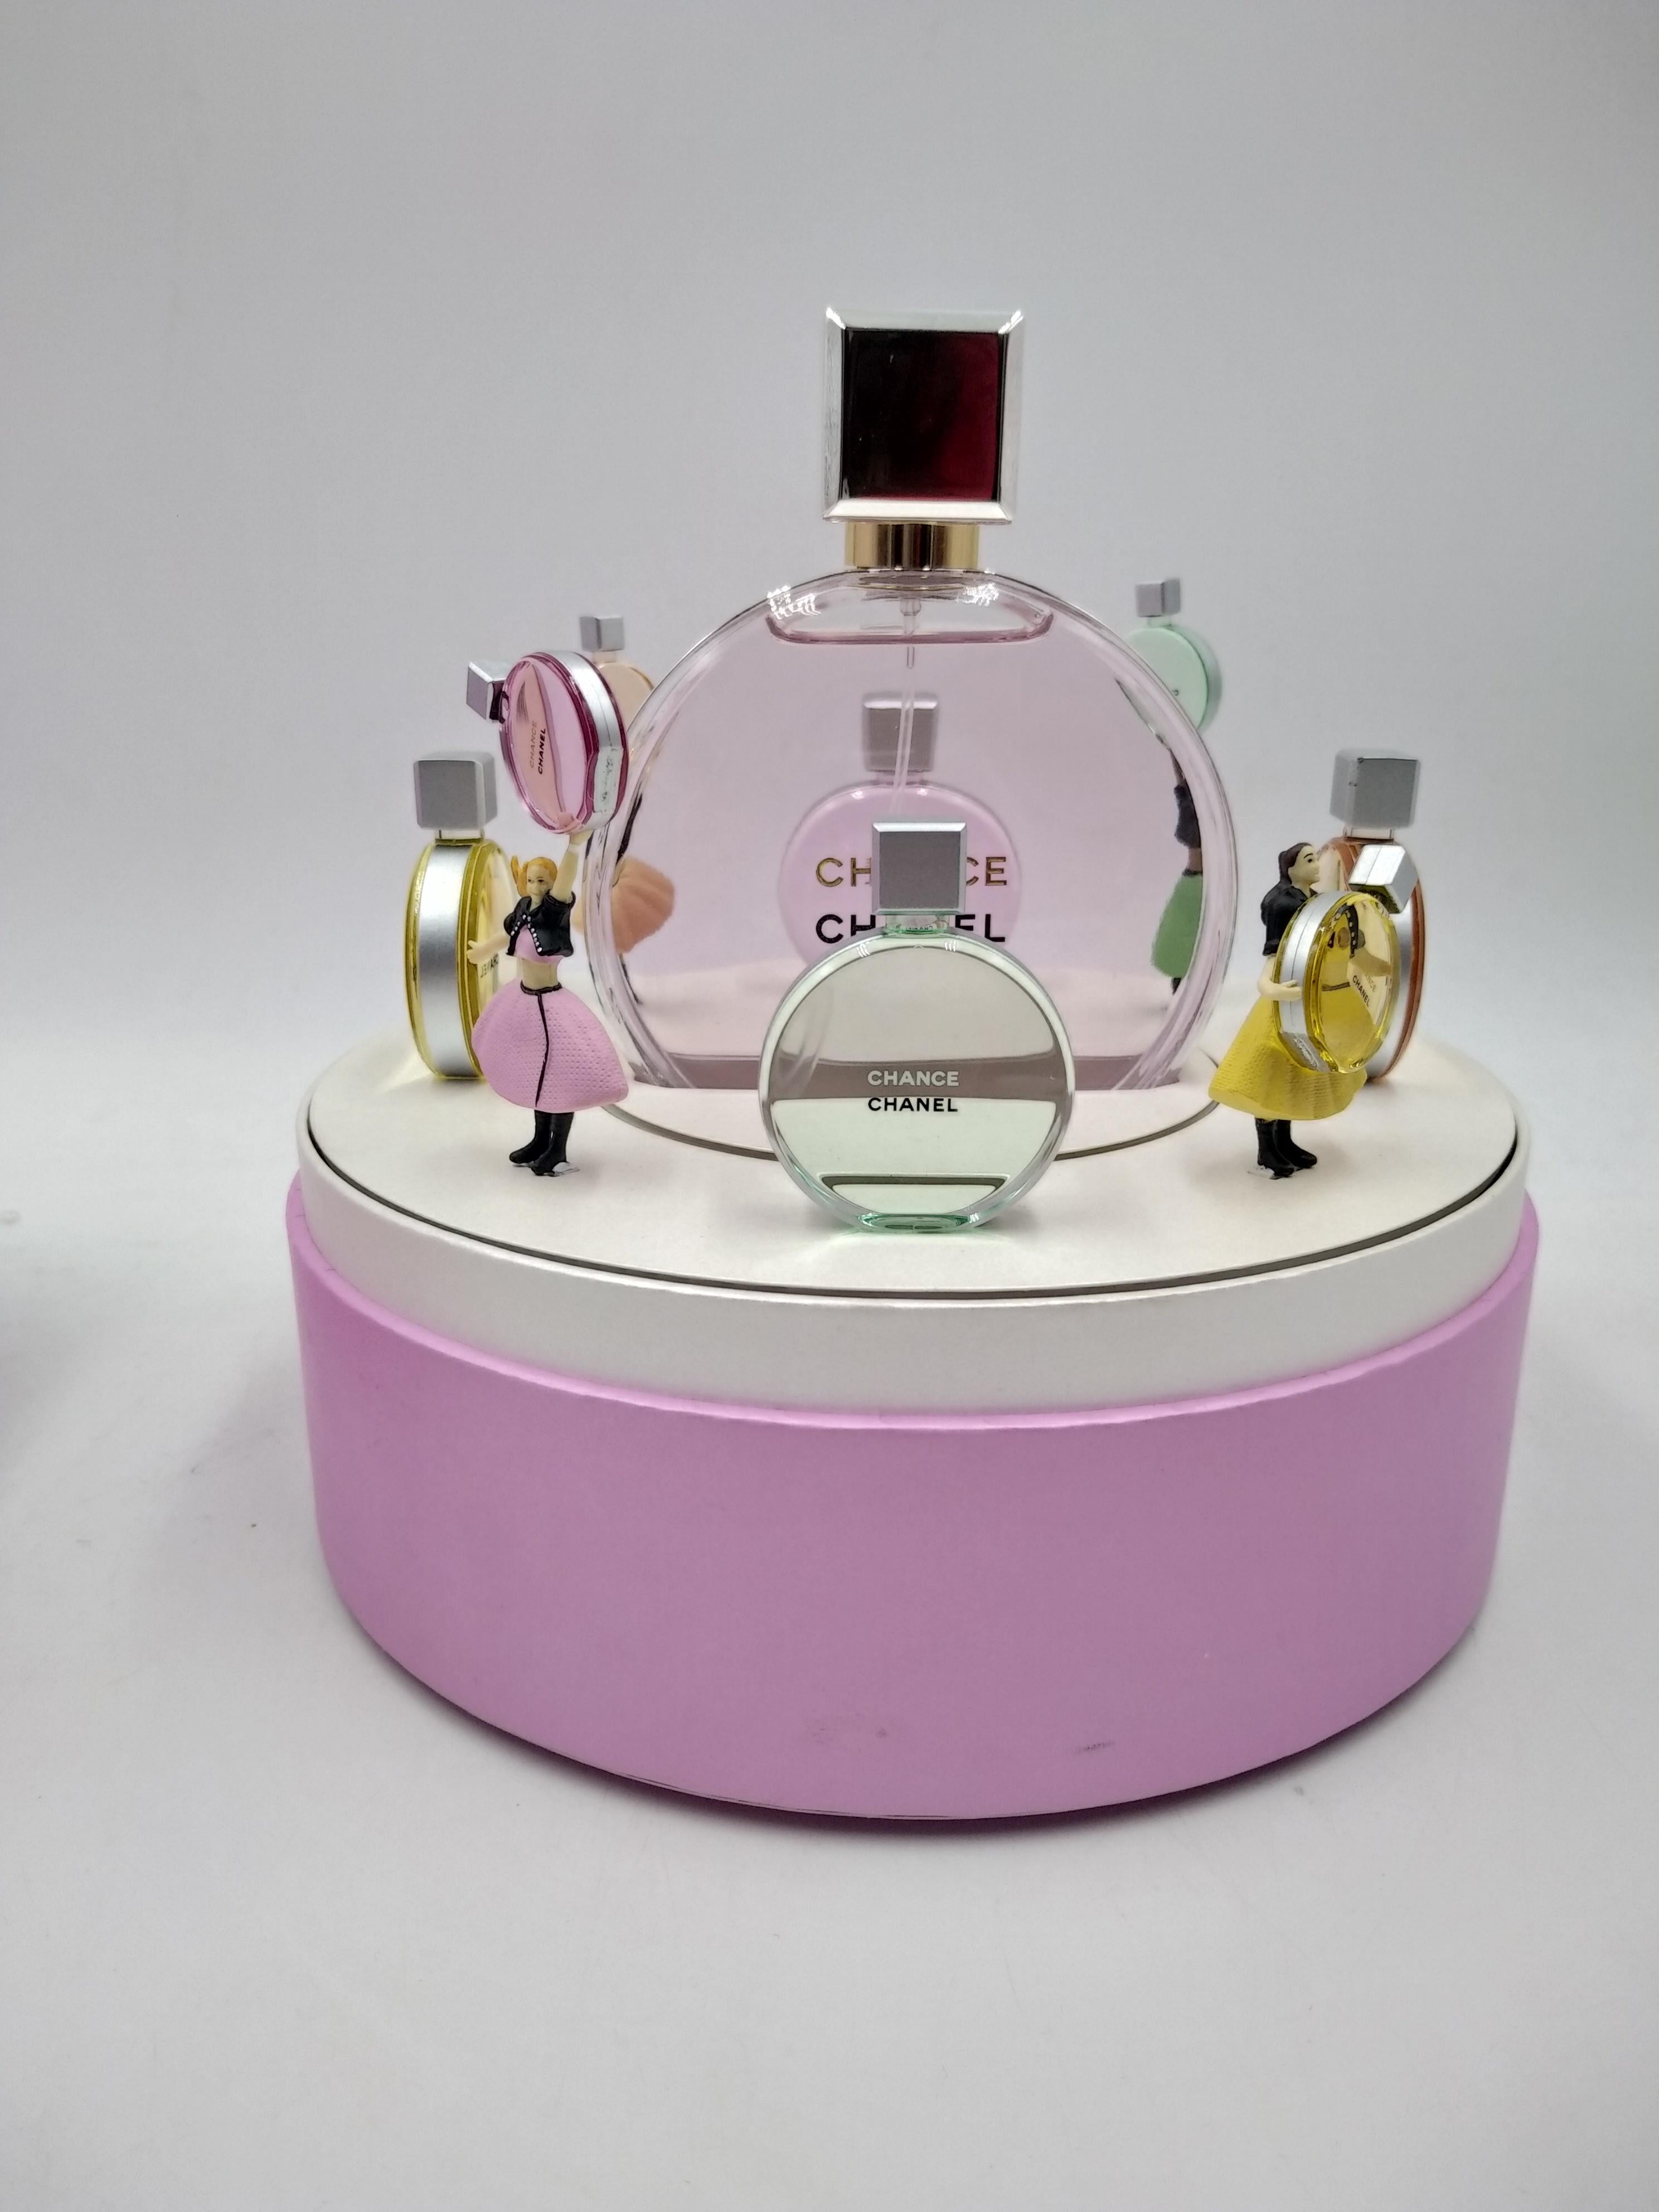 Chanel eau tendre music box Limited Edition 2022 
Inspired by the advertising film directed by Jean-Paul Goude, the CHANCE EAU TENDRE music box offers a dynamic encounter with chance, in the form of a mobile theatre.
Chanel Chance Eau Tendre Music